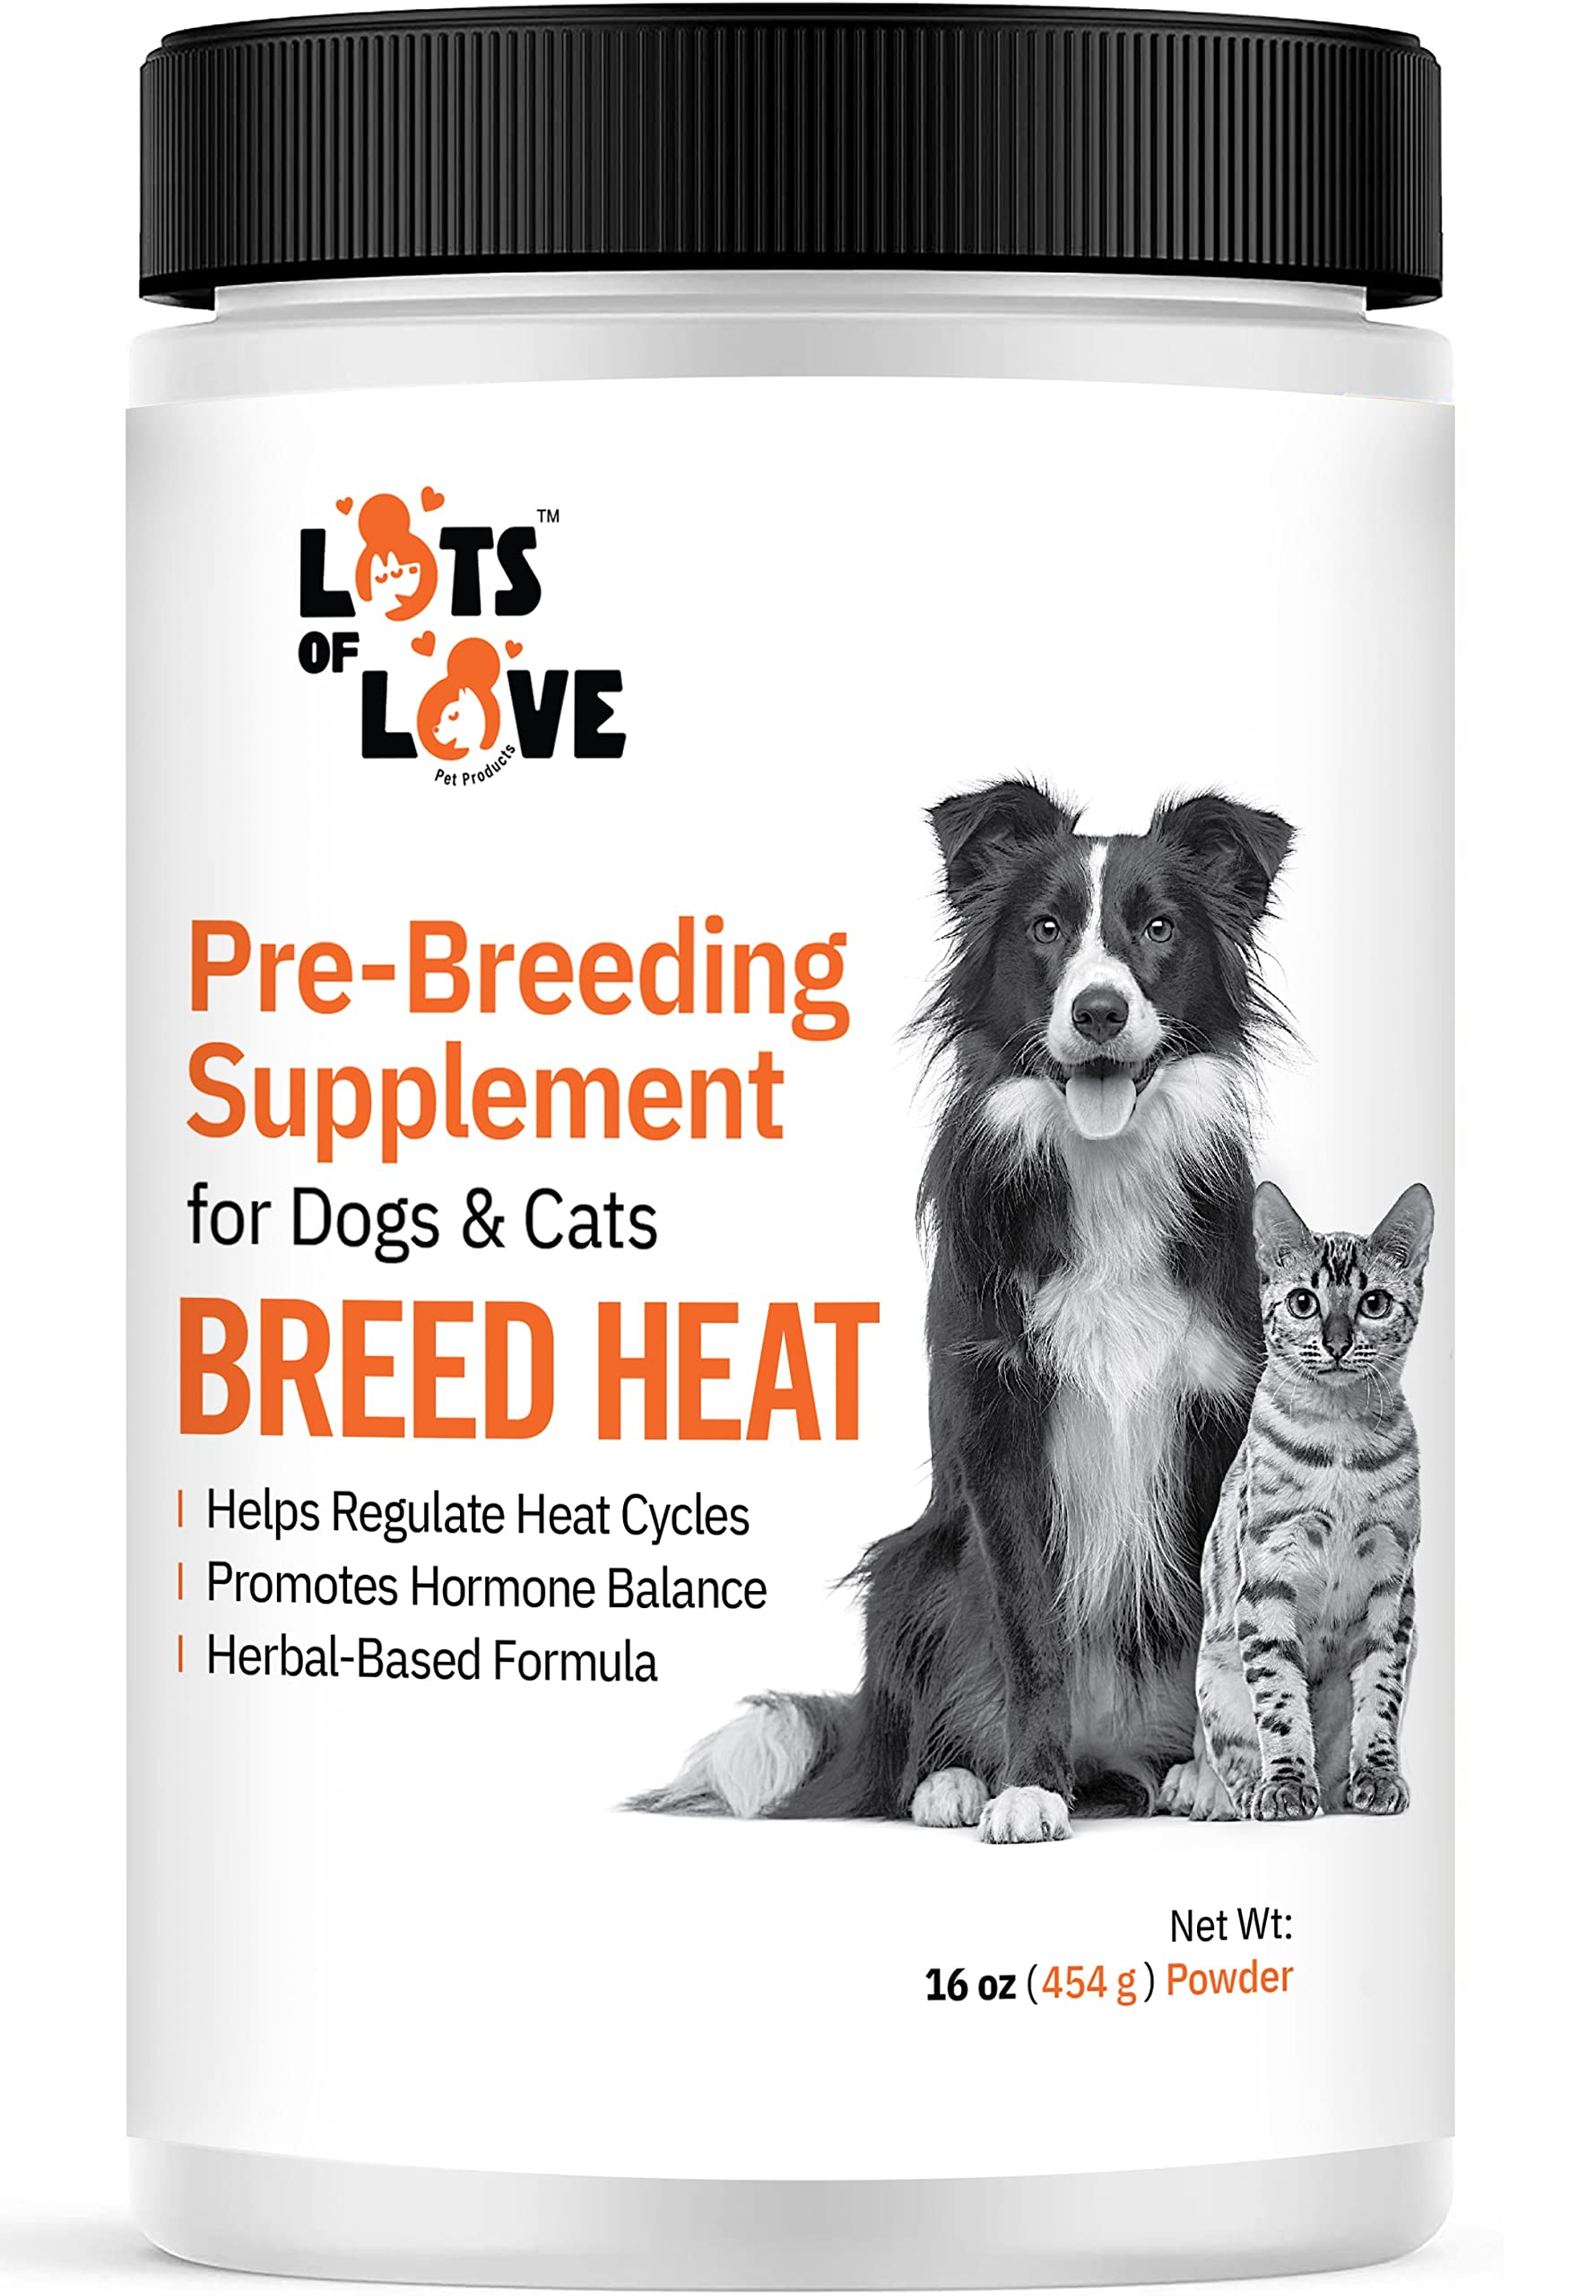 LOTS OF LOVE PET PRO Breed Heat - Breeding & Reproductive Supplement for Dogs & cats (Formerly Thomas Labs Same Product) - 16 oz Powder